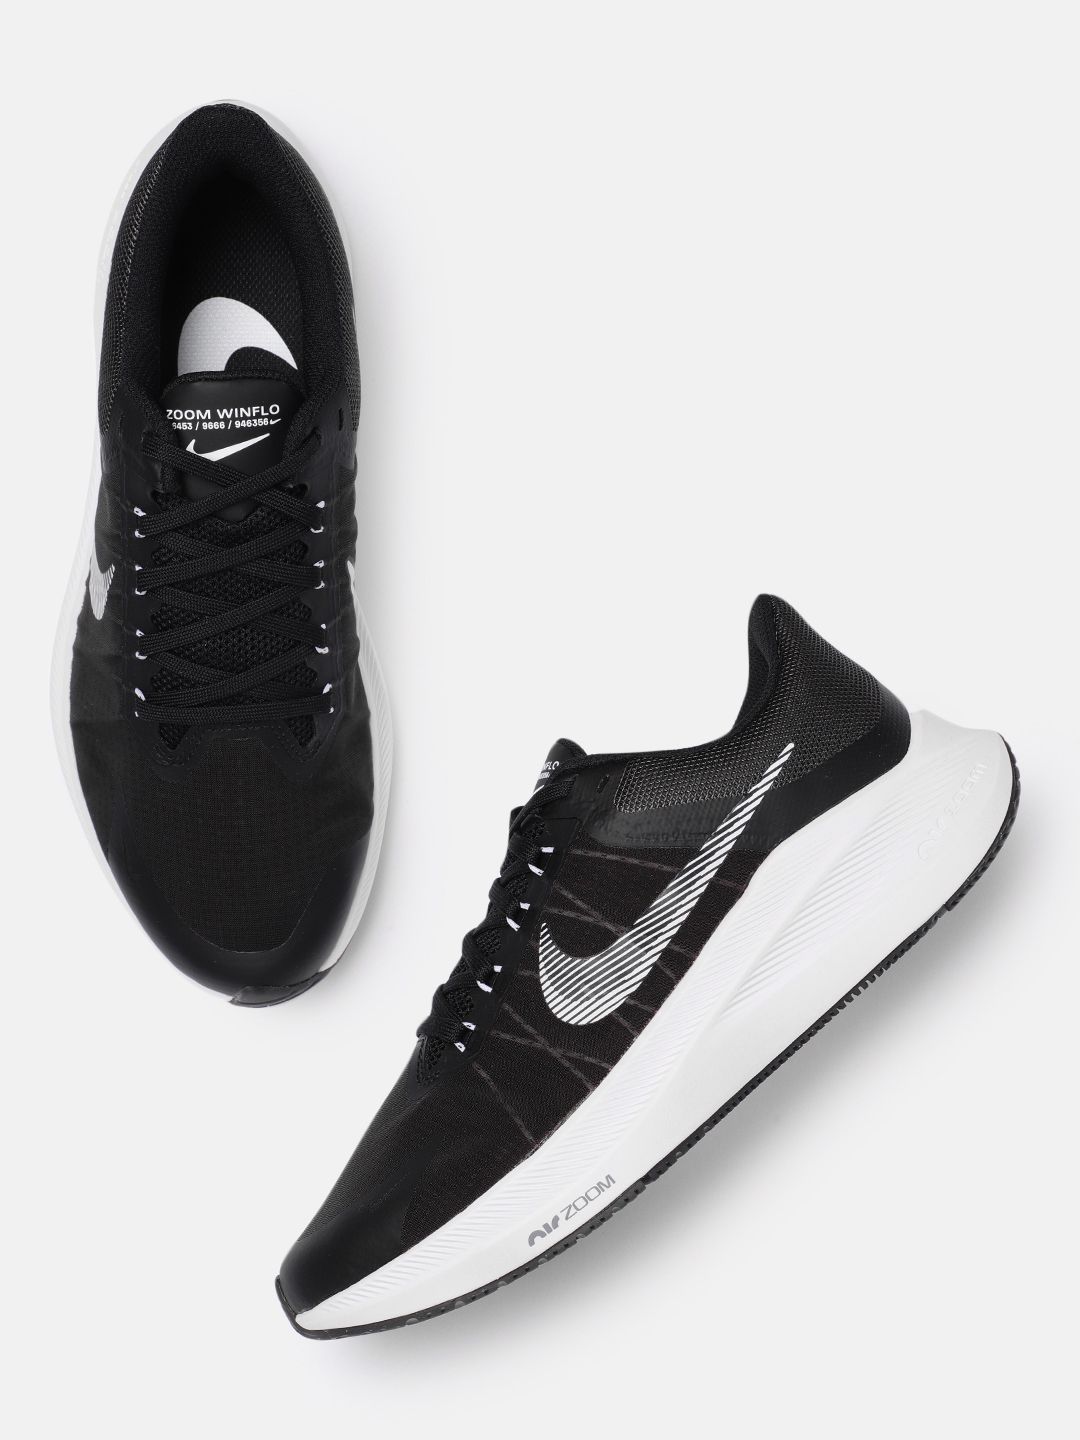 Nike Women Black Textile Running Shoes Price in India